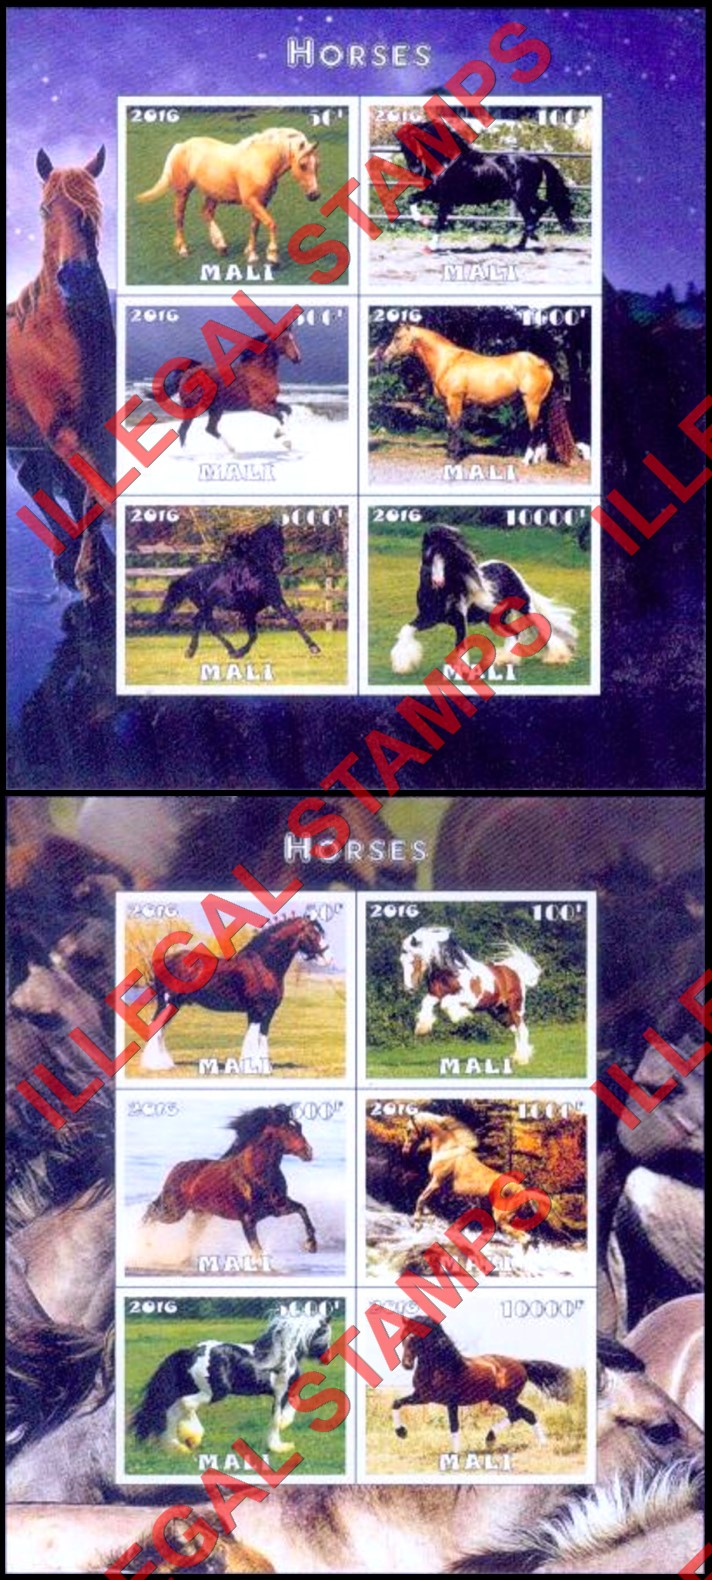 Mali 2016 Horses Illegal Stamp Souvenir Sheets of 6 (Part 1)